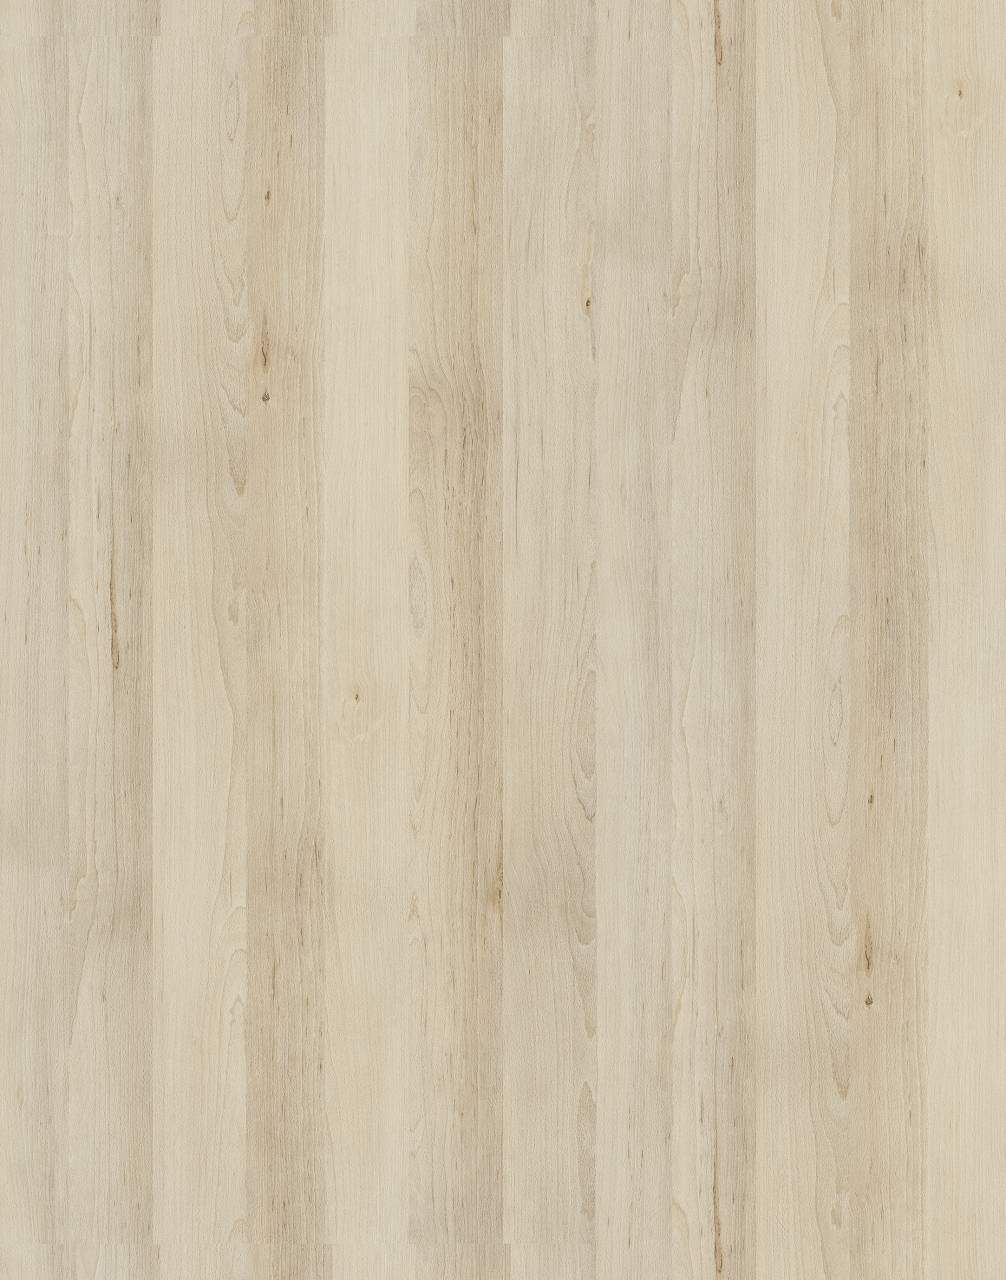 Pearl Artisan Beech SU HPL with smooth surface and creamy white tones for a sophisticated and elegant look.